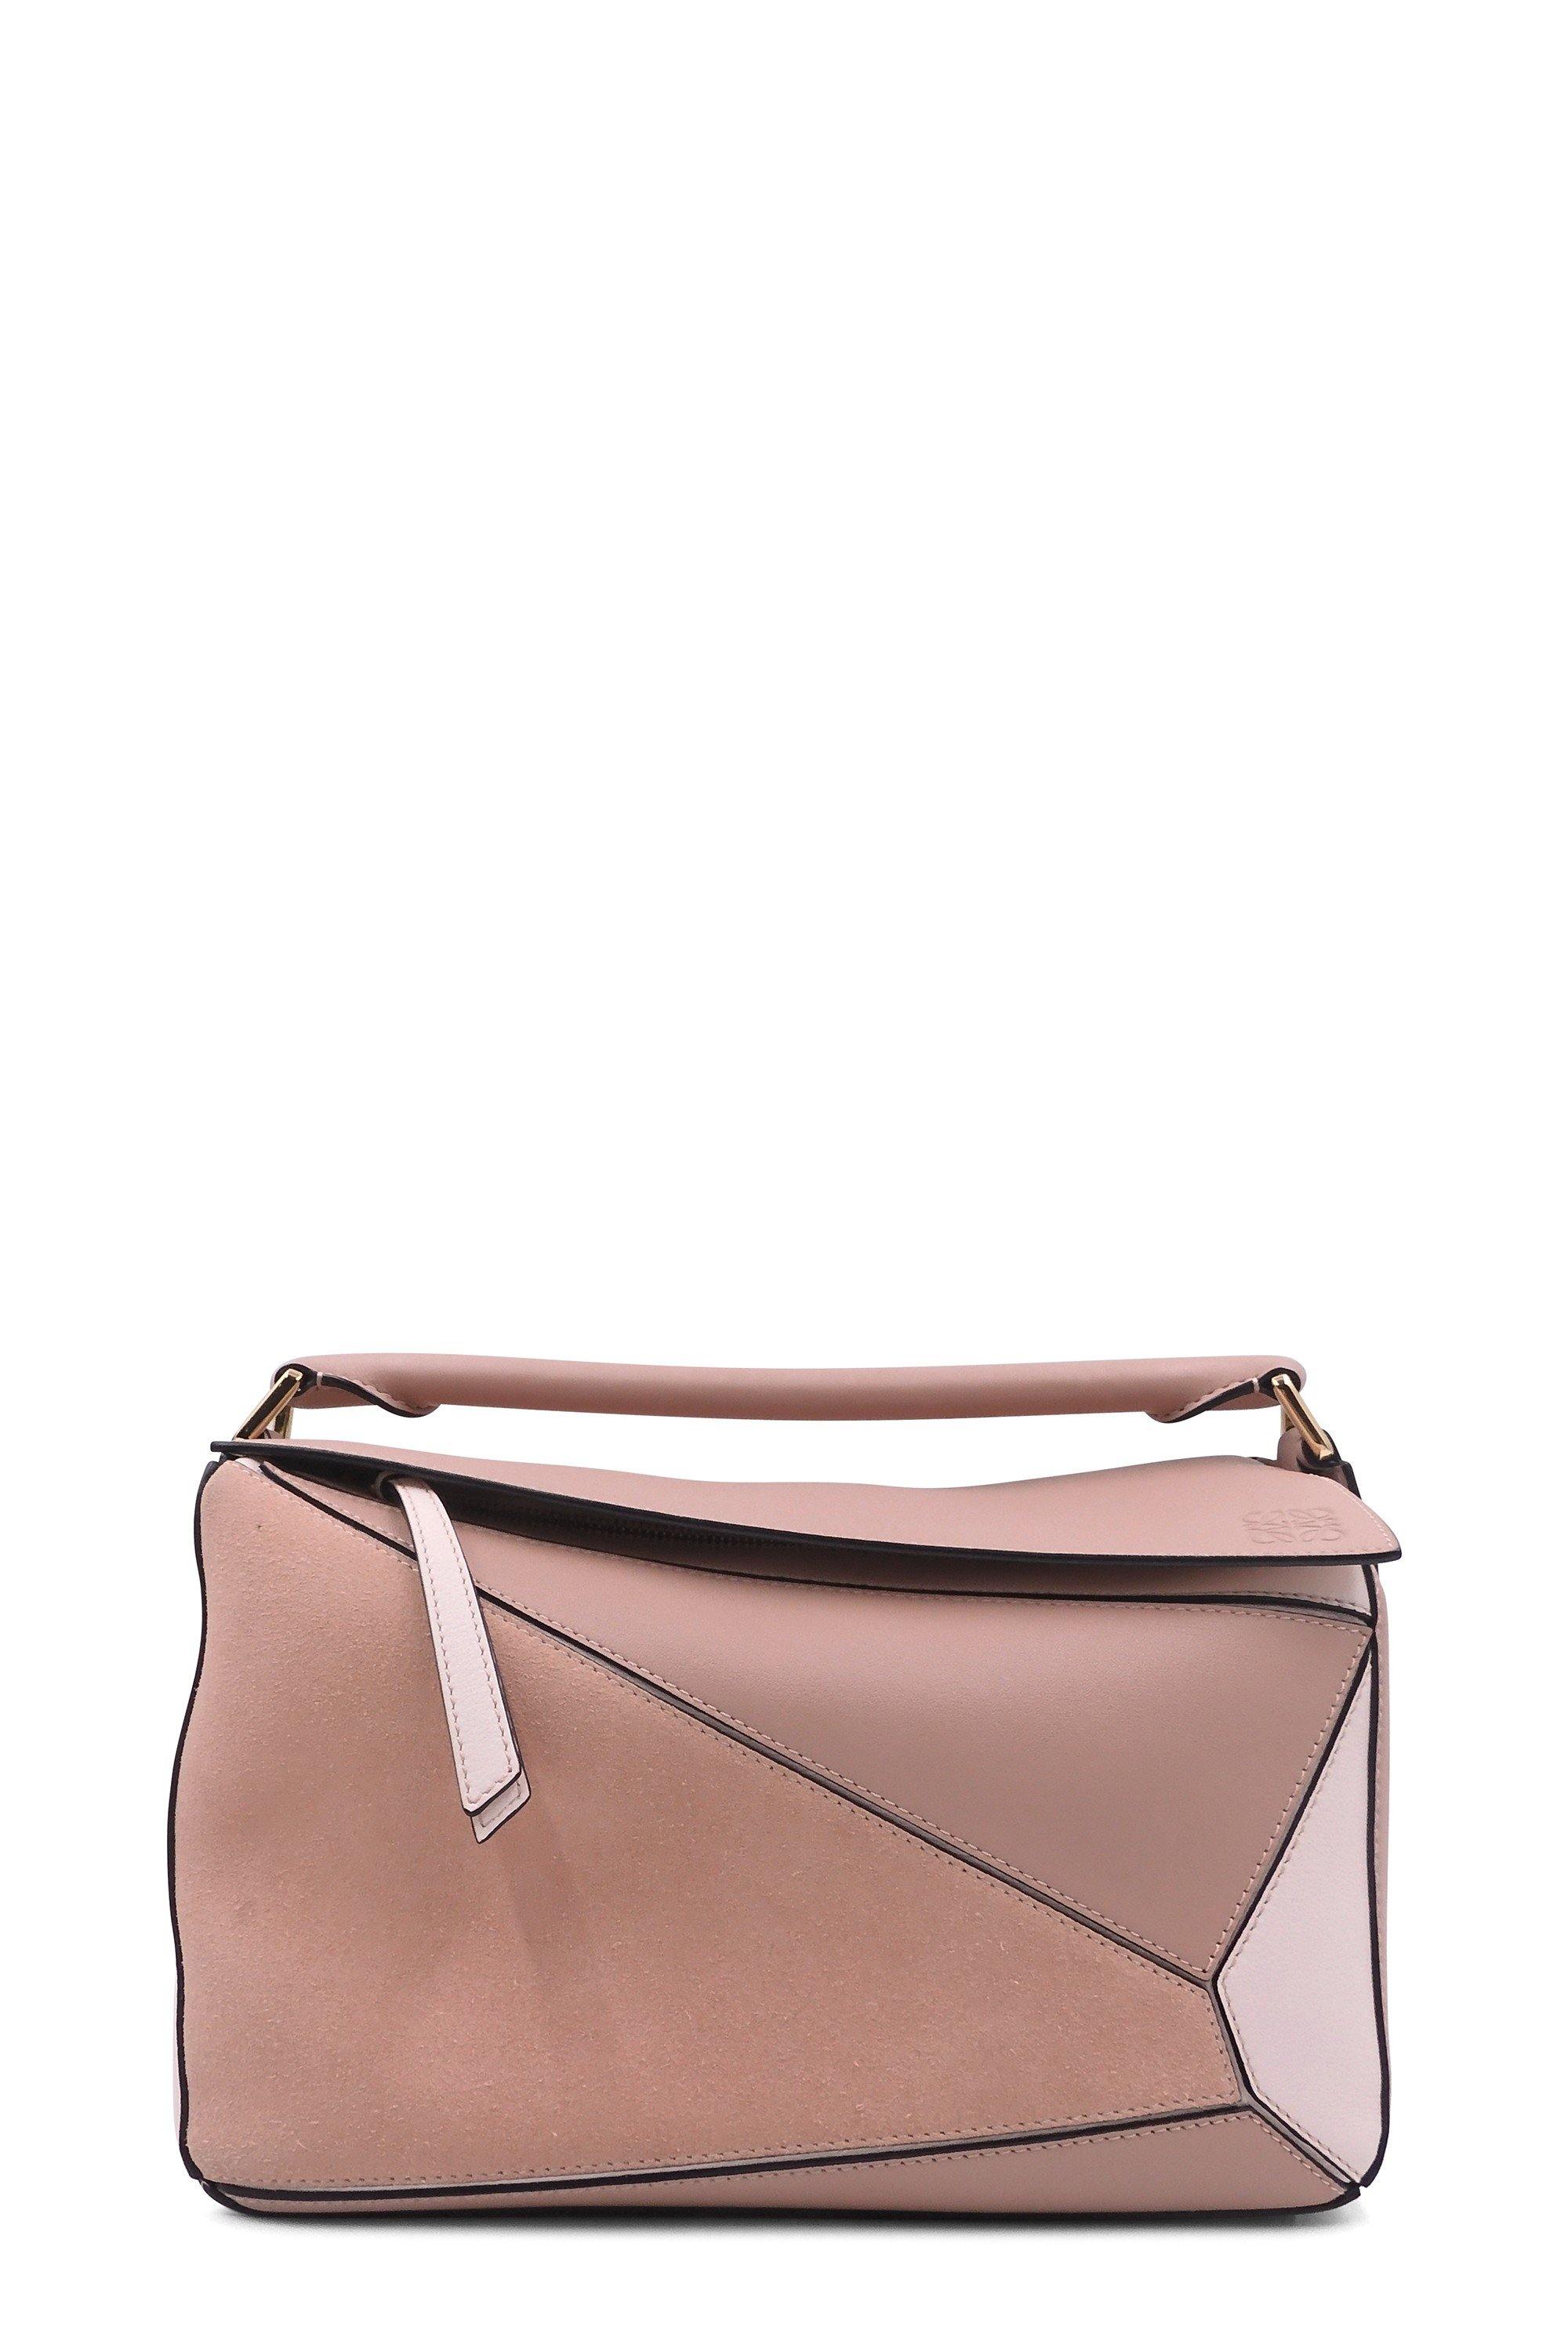 Buy Authentic, Preloved Loewe Medium Puzzle Bag with Suede Nude Cream Bags  from Second Edit by Style Theory